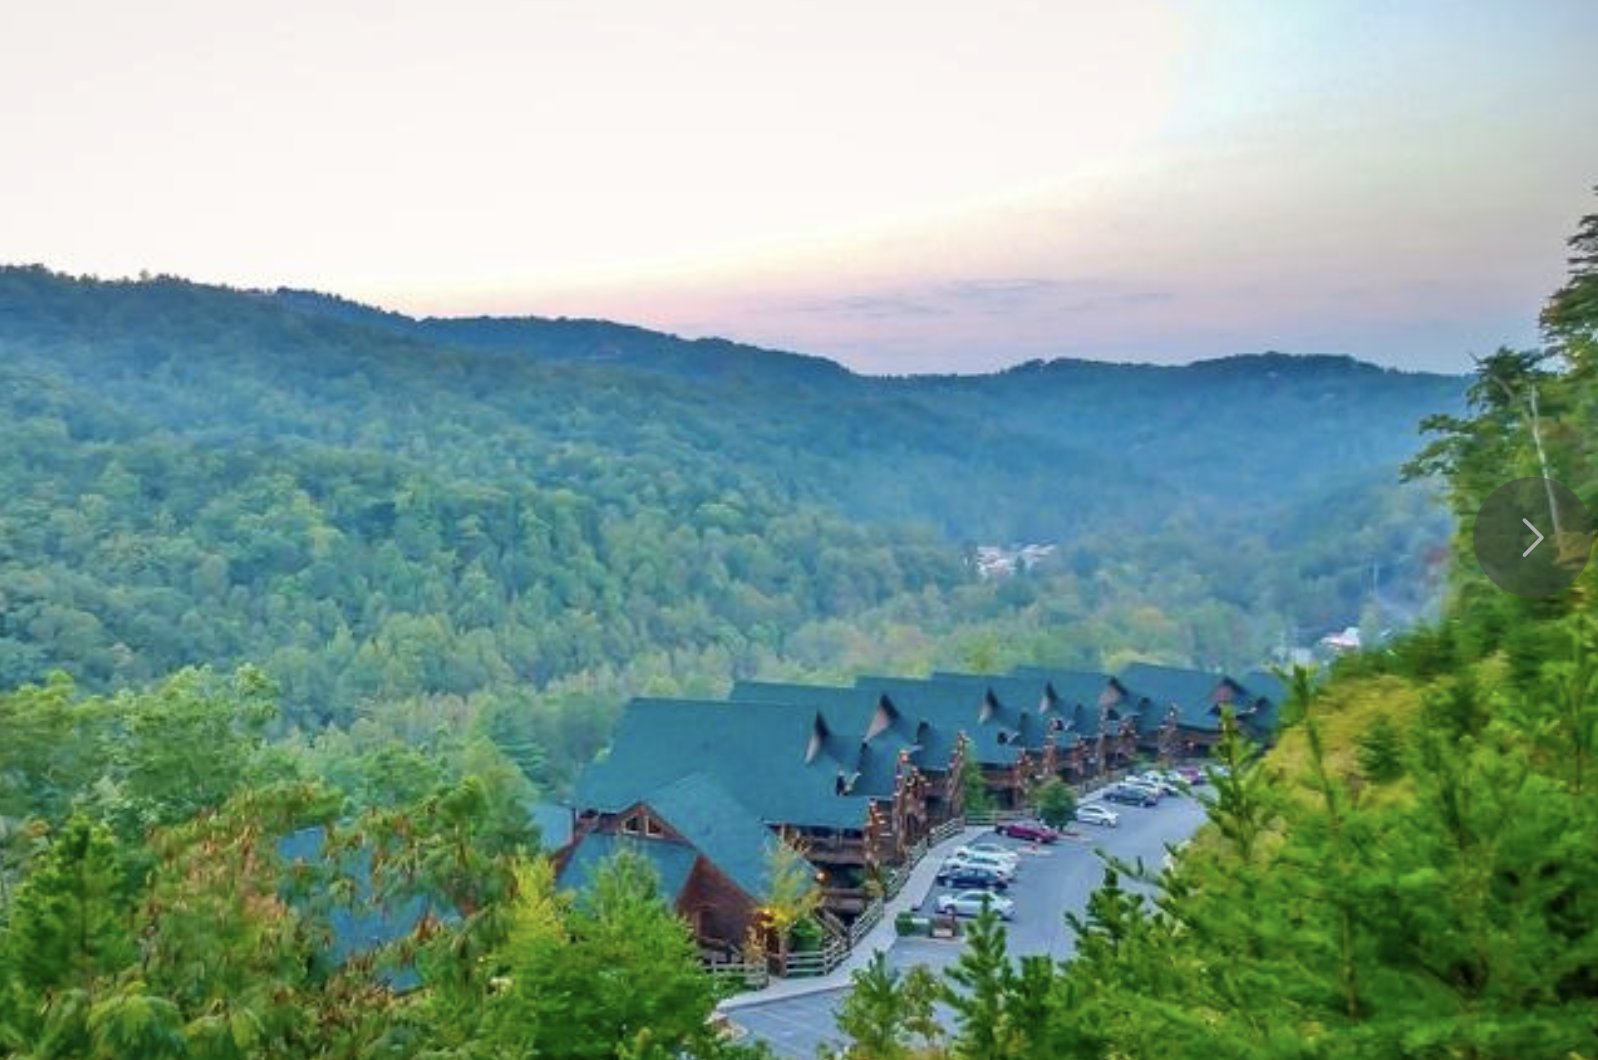 Westgate Smoky Mountain Resort & Water Park - Couples Massage Gatlinburg TN Vacation Package for $99 in The Smokies